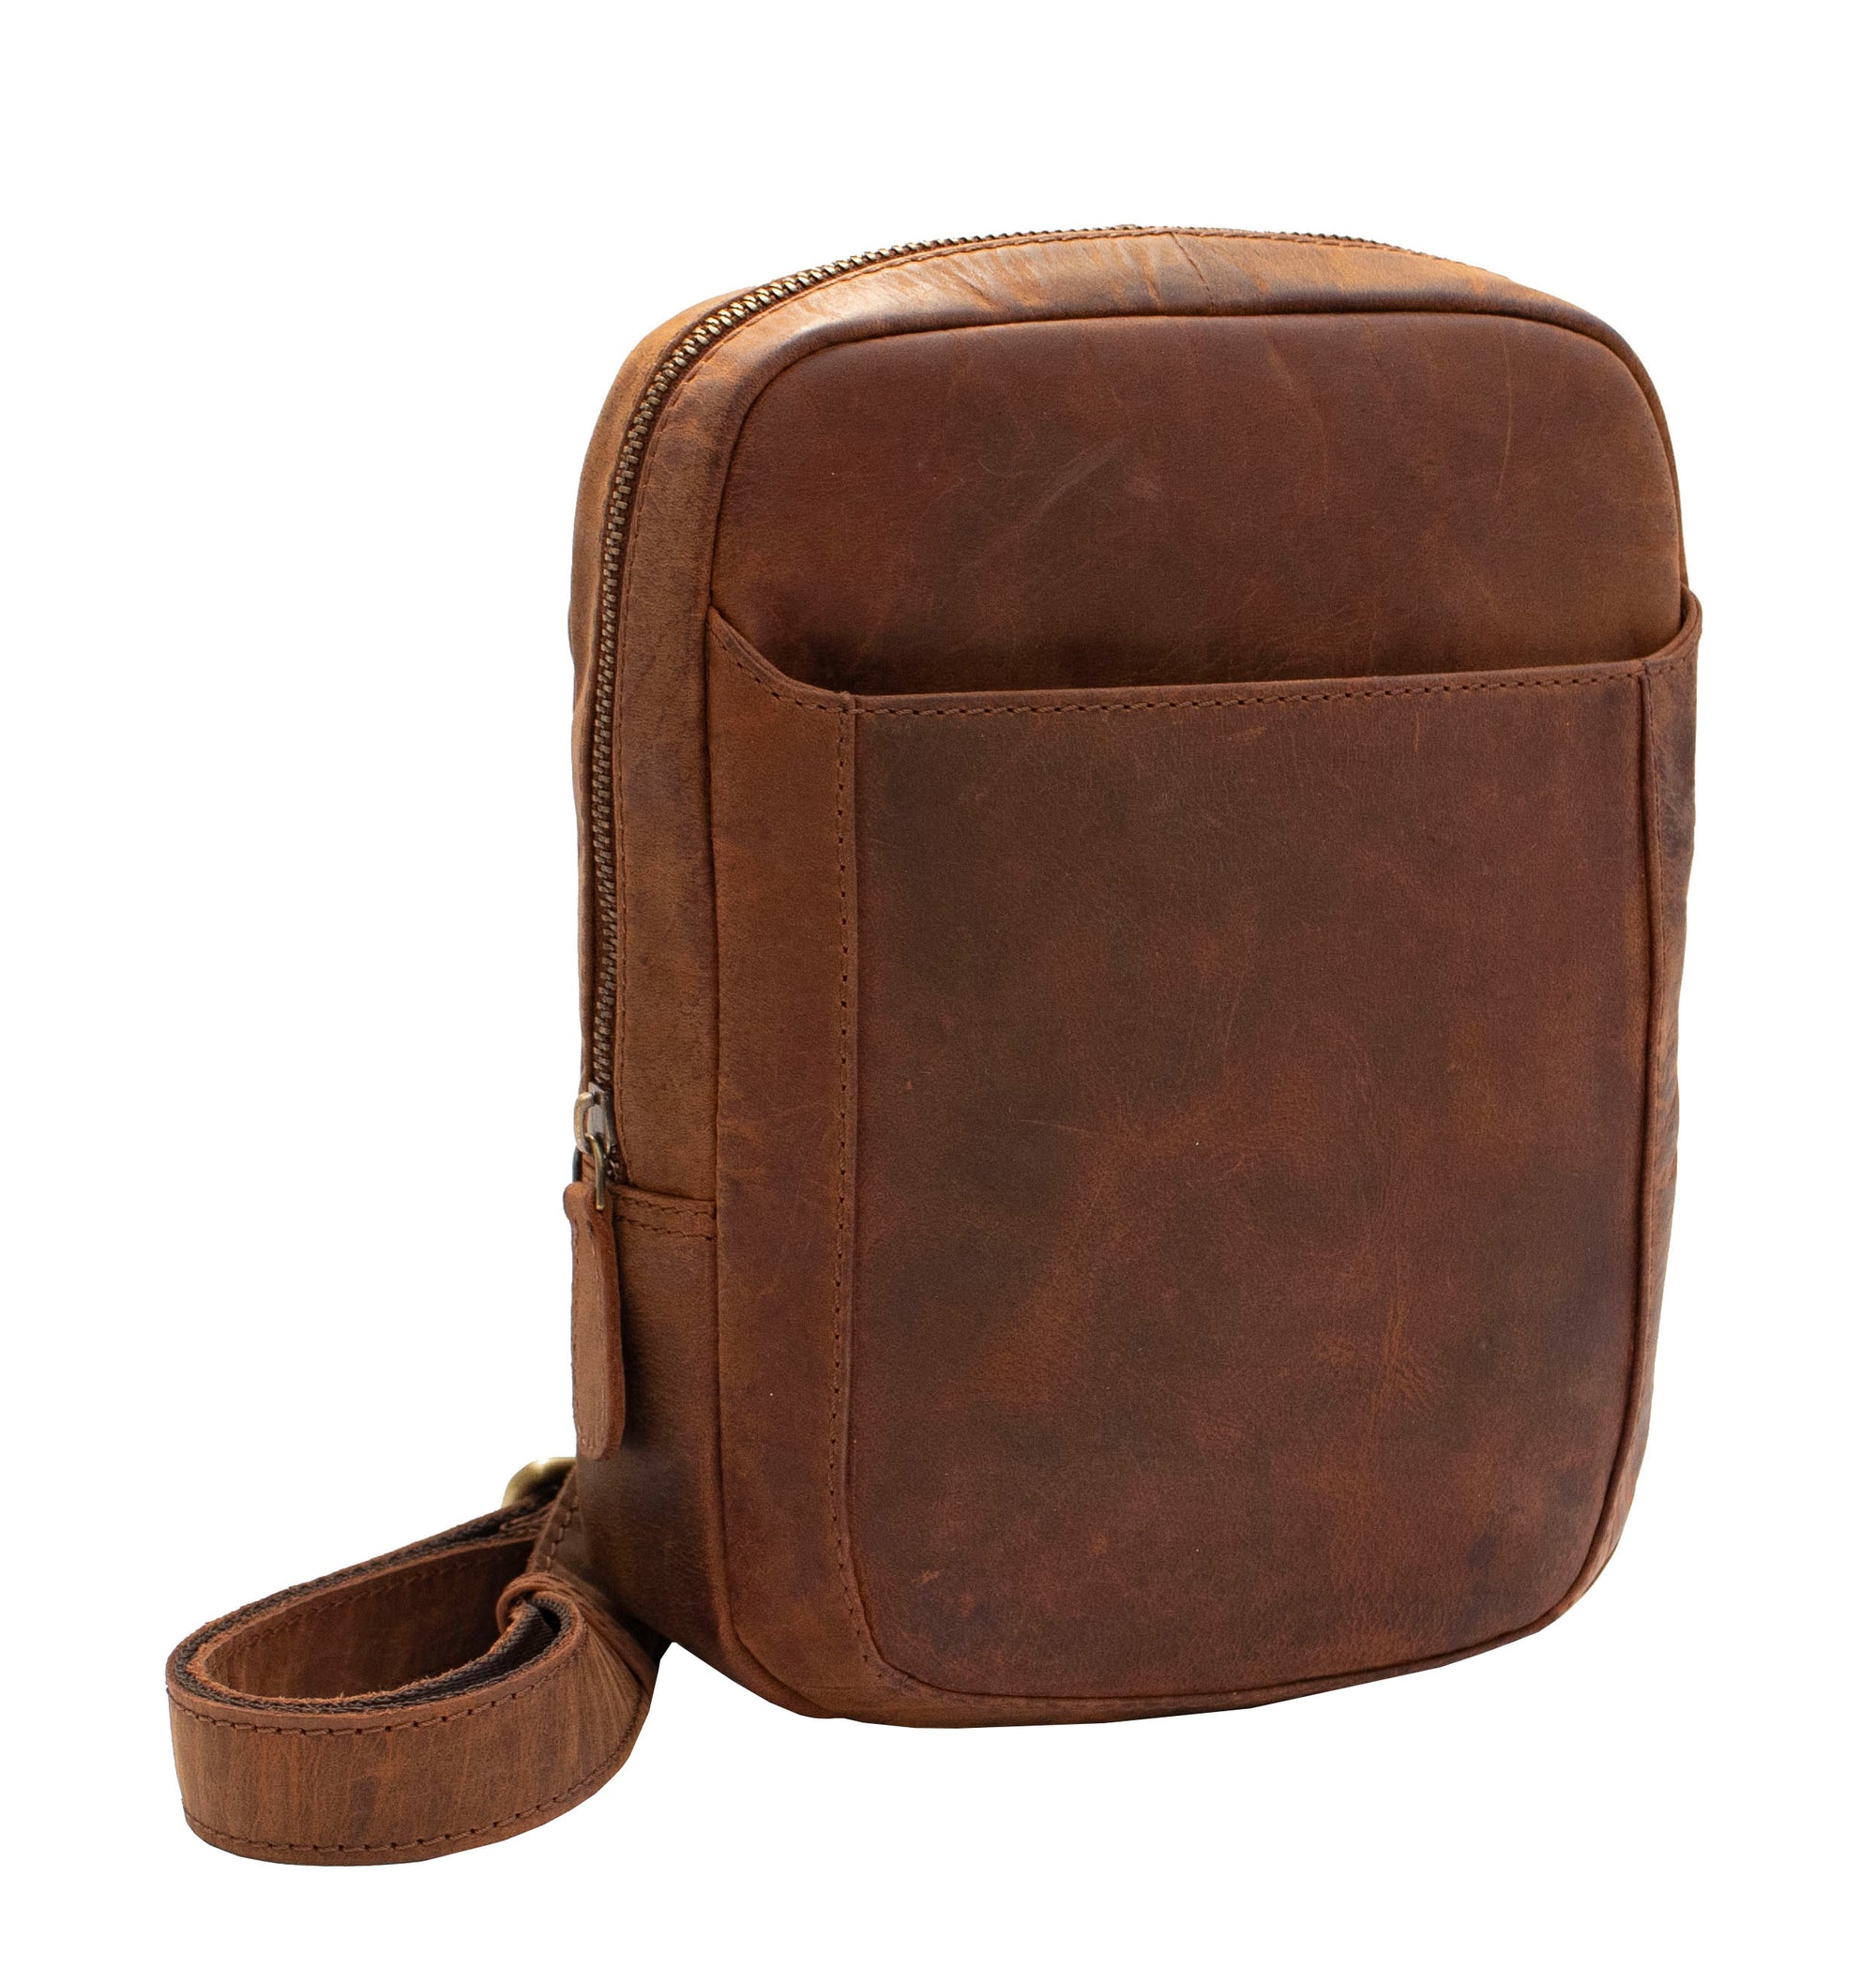 Galaxy Men's Brown Bag with front flap – 1037